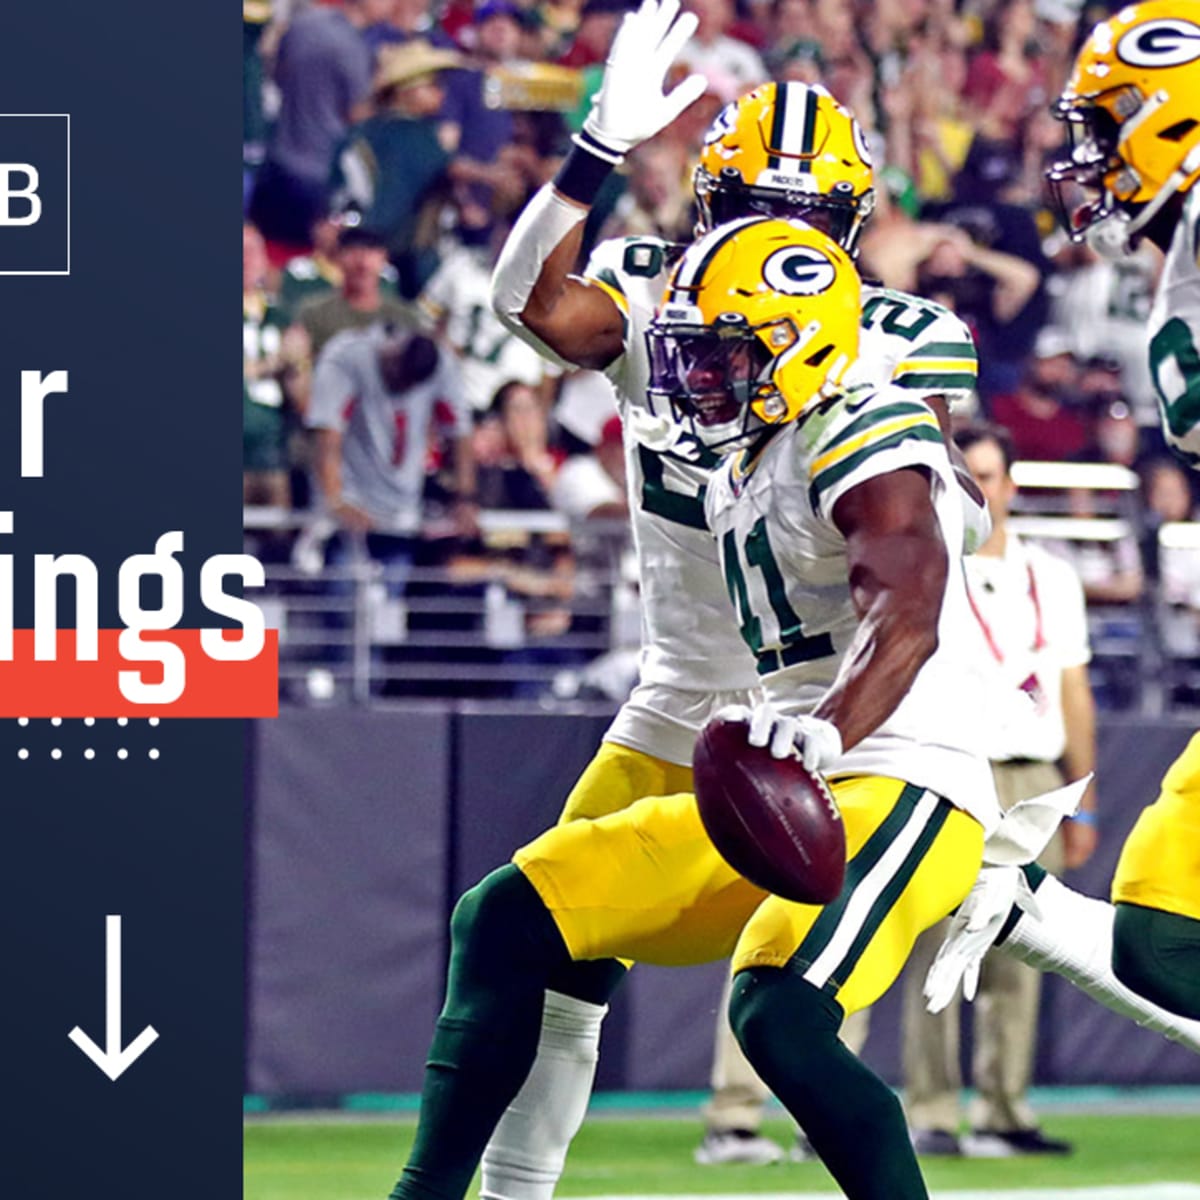 NFL Power Rankings, Week 7: Giants, Jets fly up the board; Buccaneers,  Packers fall to new lows